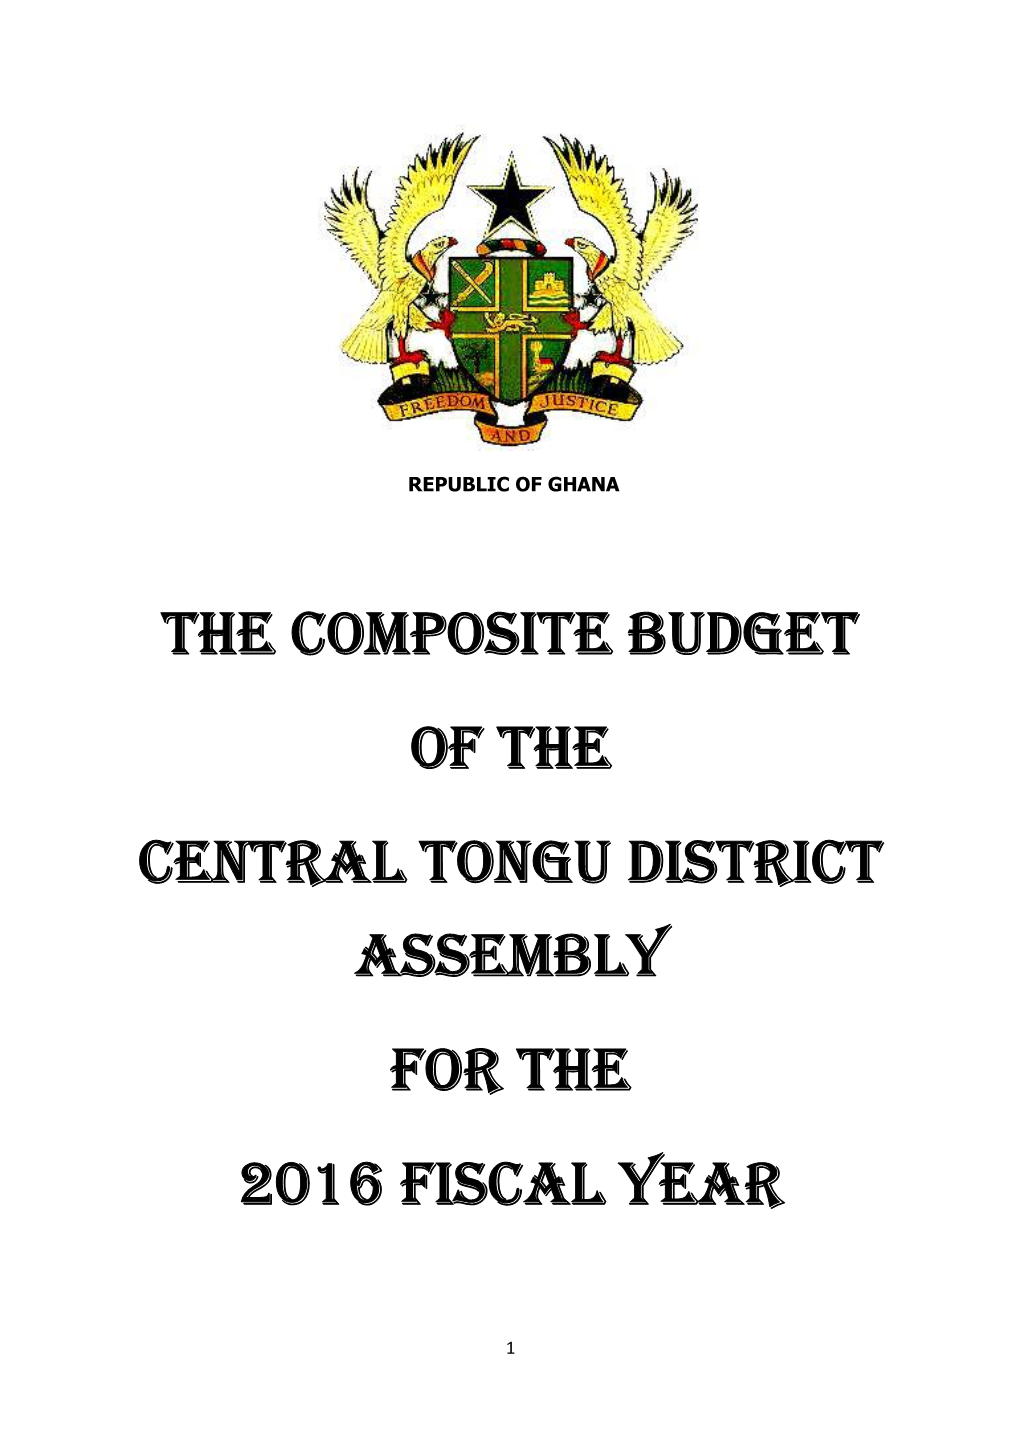 The Composite Budget of the Central Tongu District Assembly for the 2016 Fiscal Year